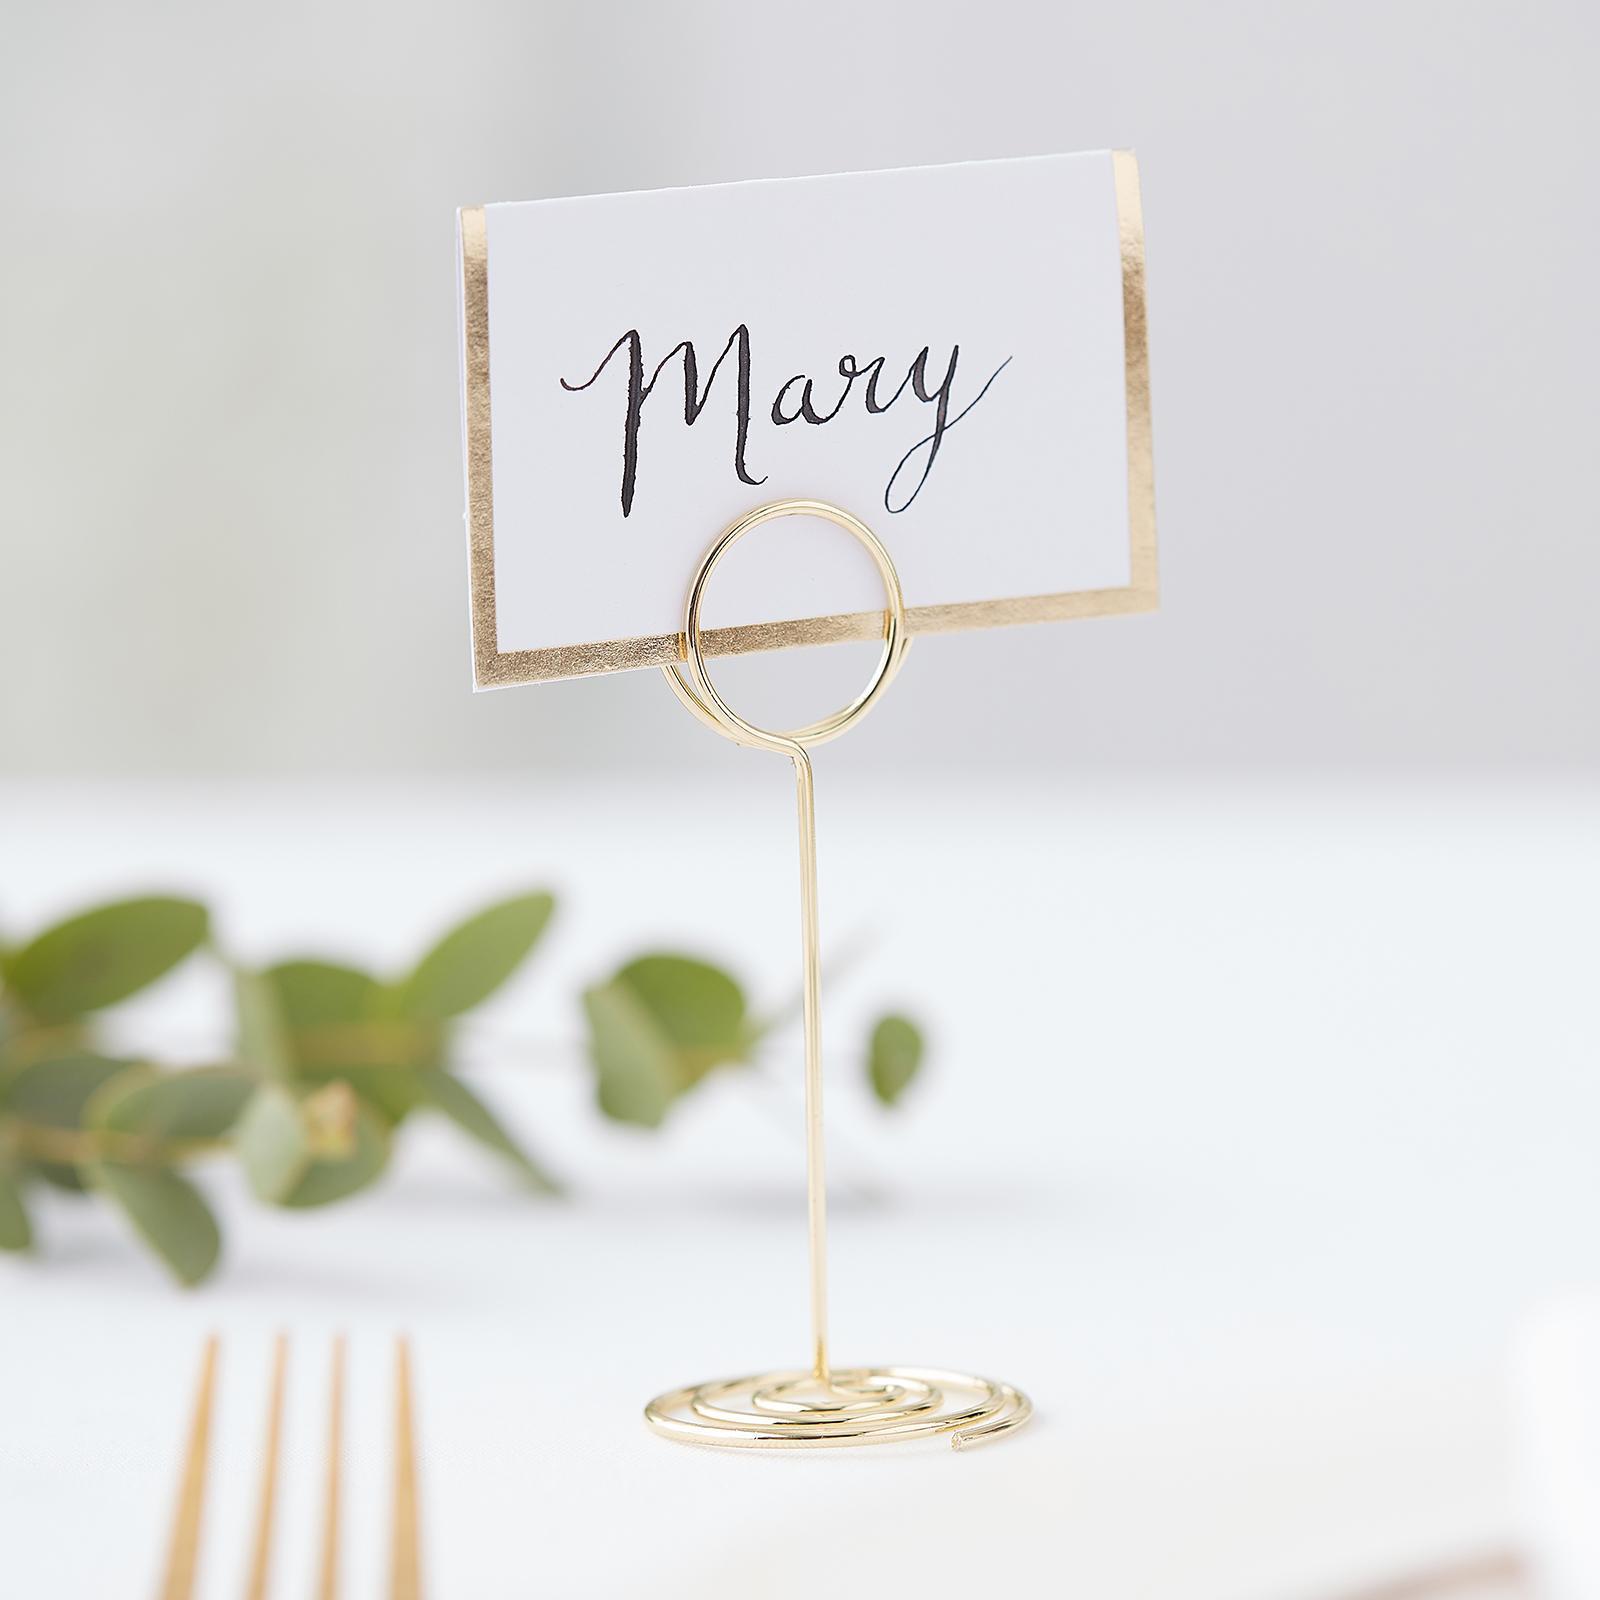 place card photo holders